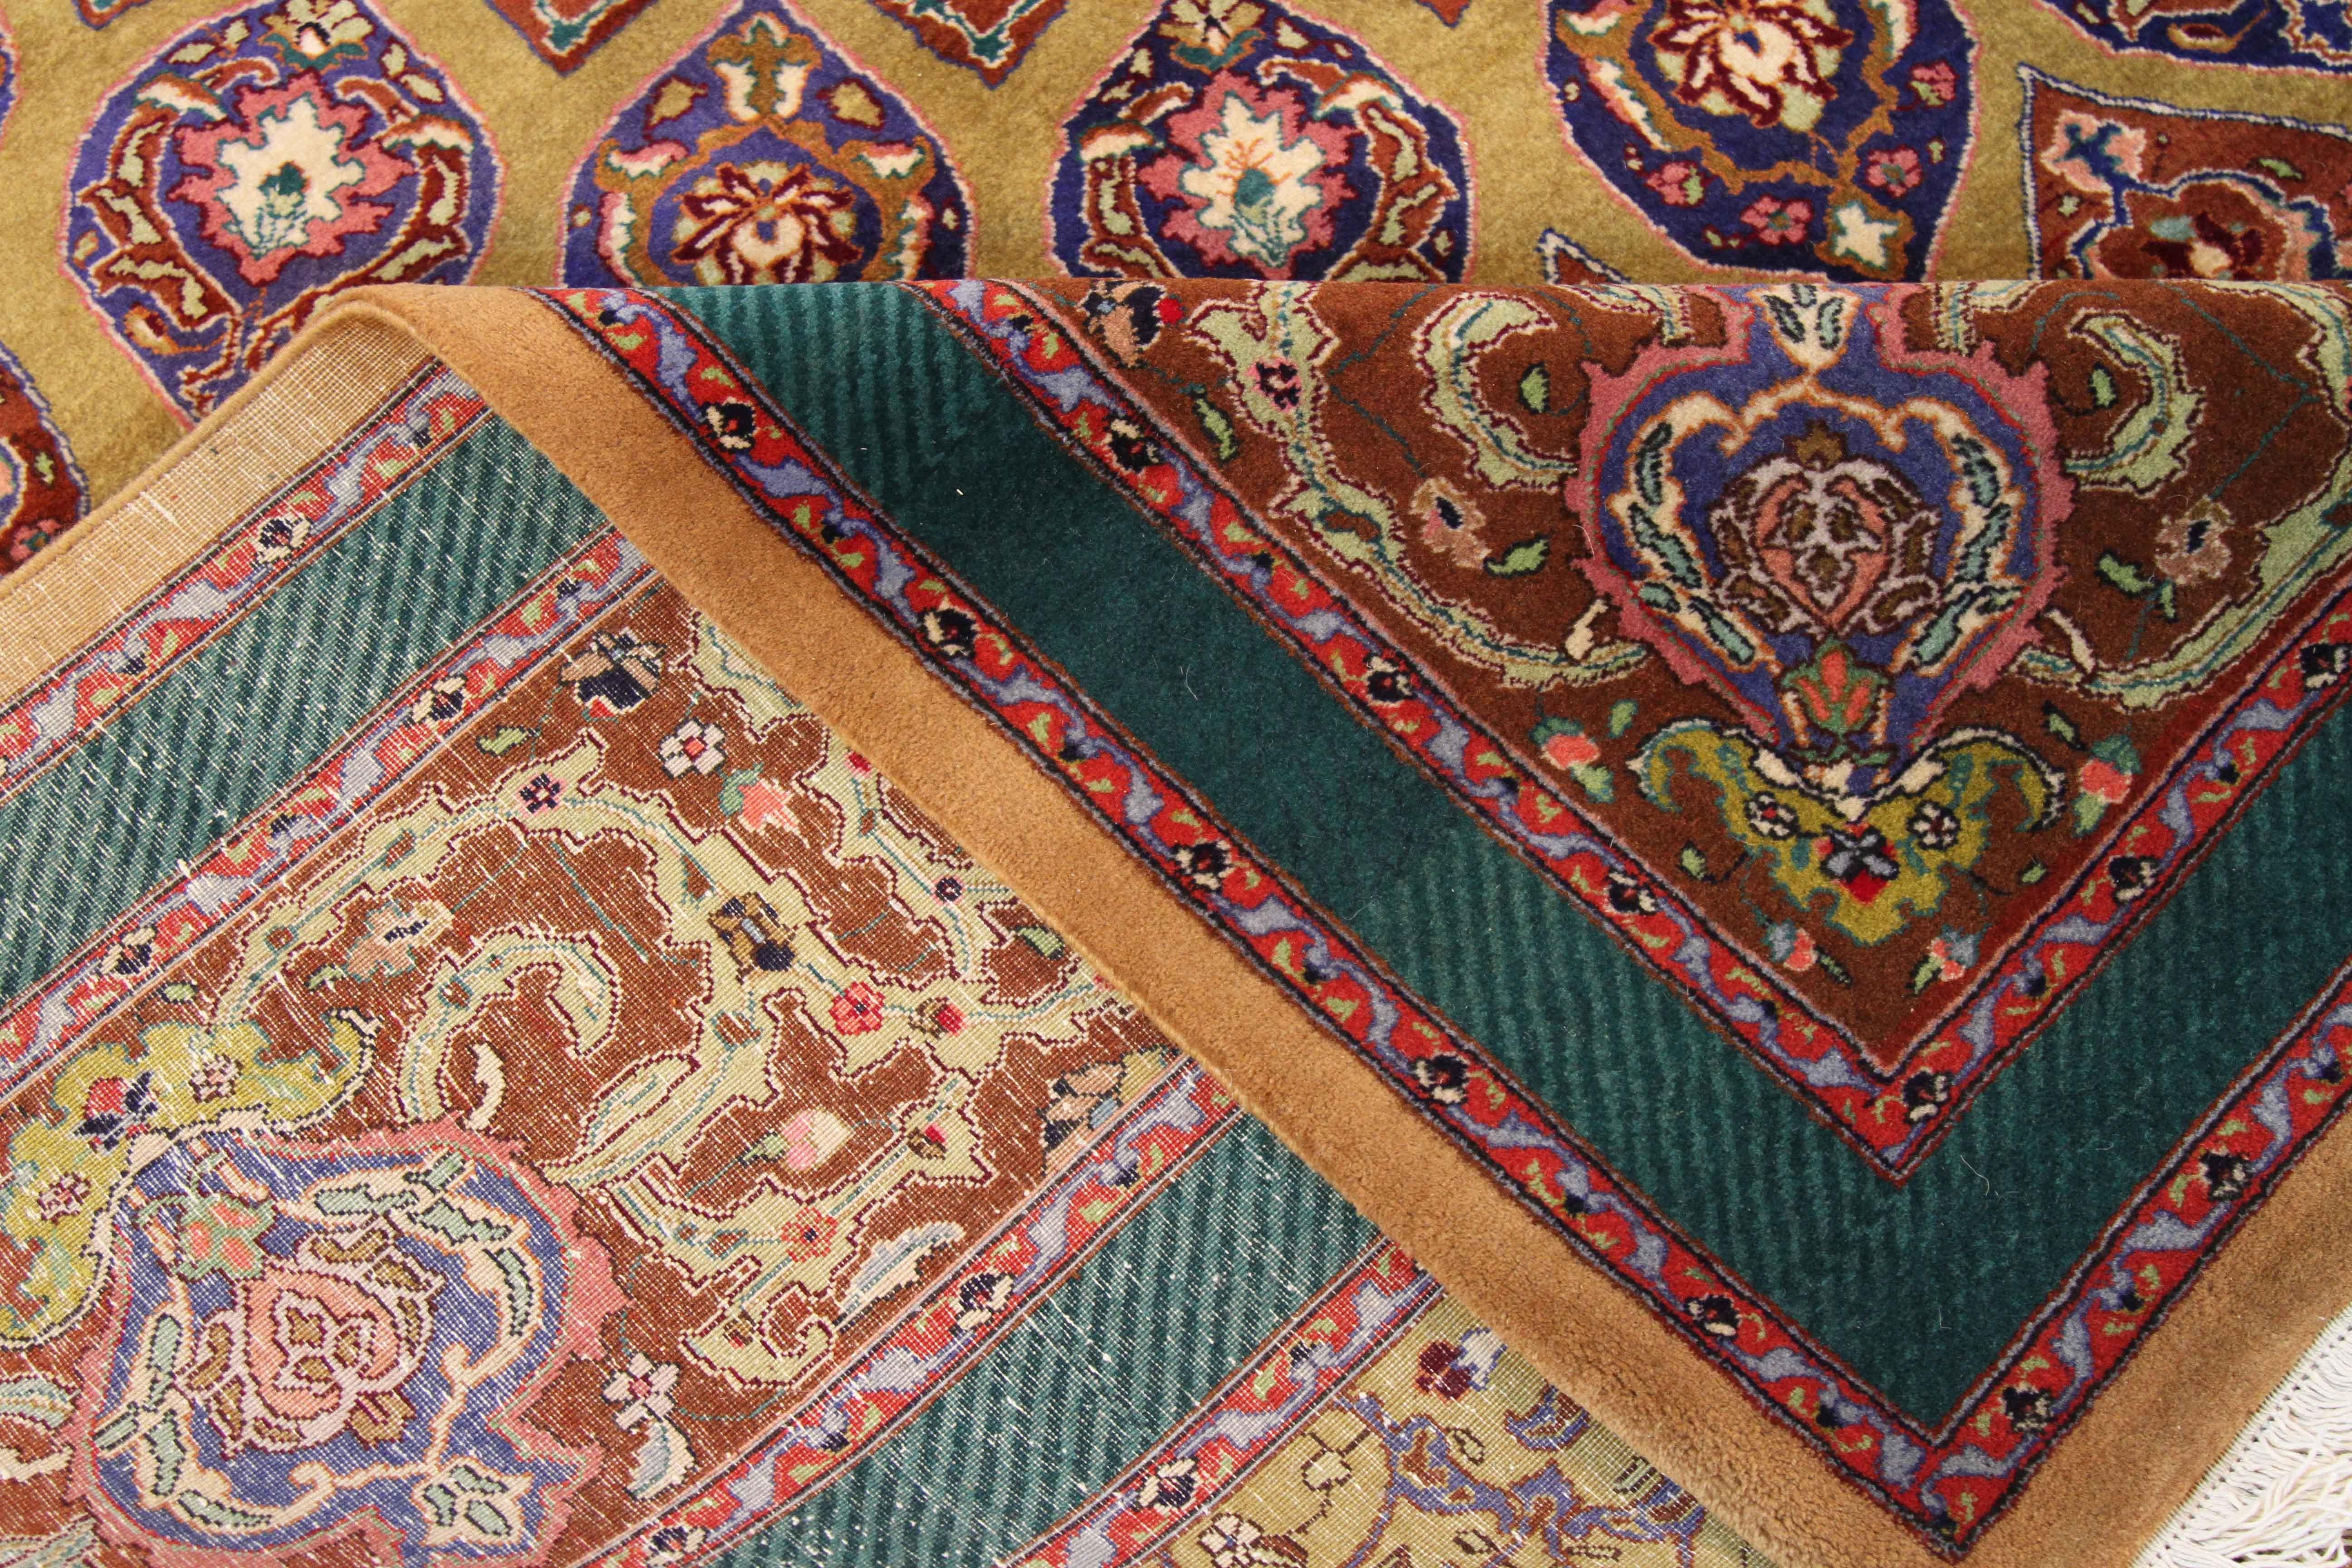 Antique Persian rug handwoven in the 1970s from fine wool and all-organic dyes. It presents repeating floral patterns arranged circularly on the center field. It has deep green, red, navy, and yellow color palette that gives off a semi-tribal appeal